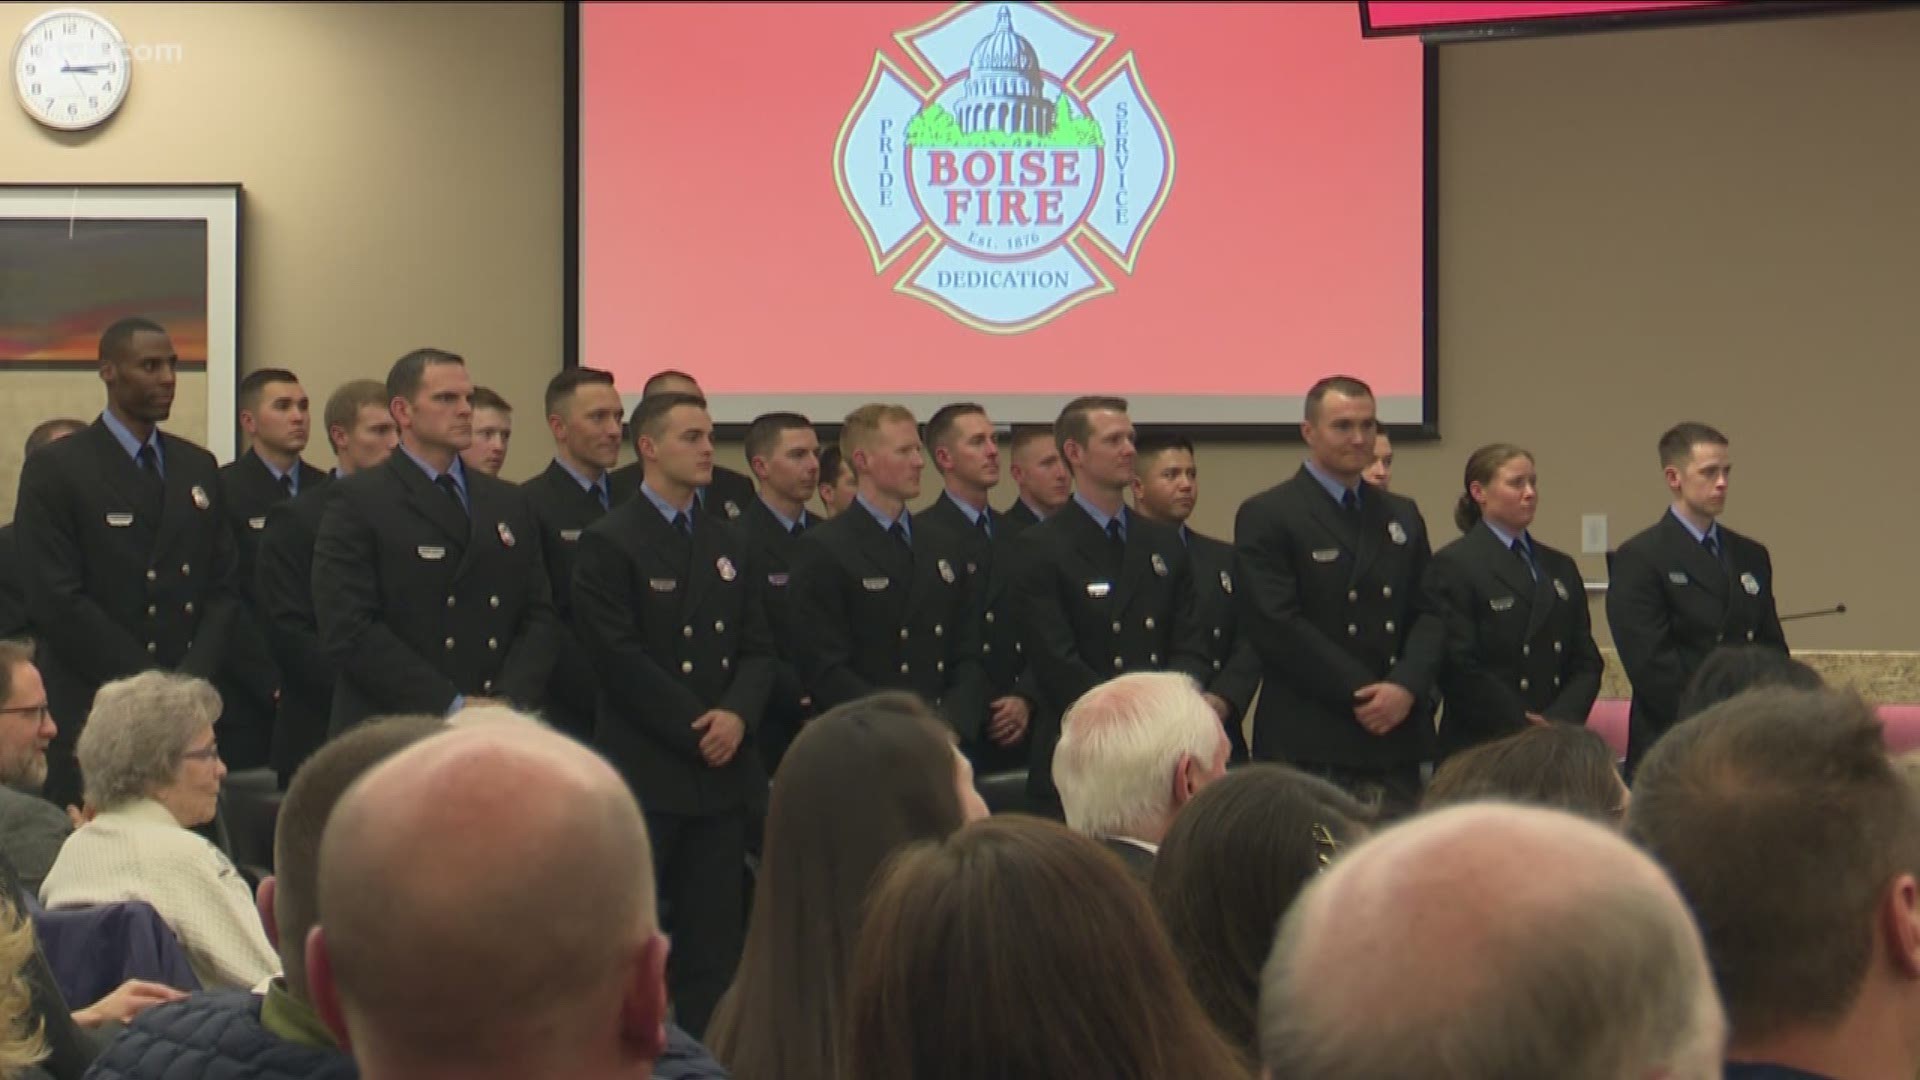 It is the largest graduating class in the fire department's history.